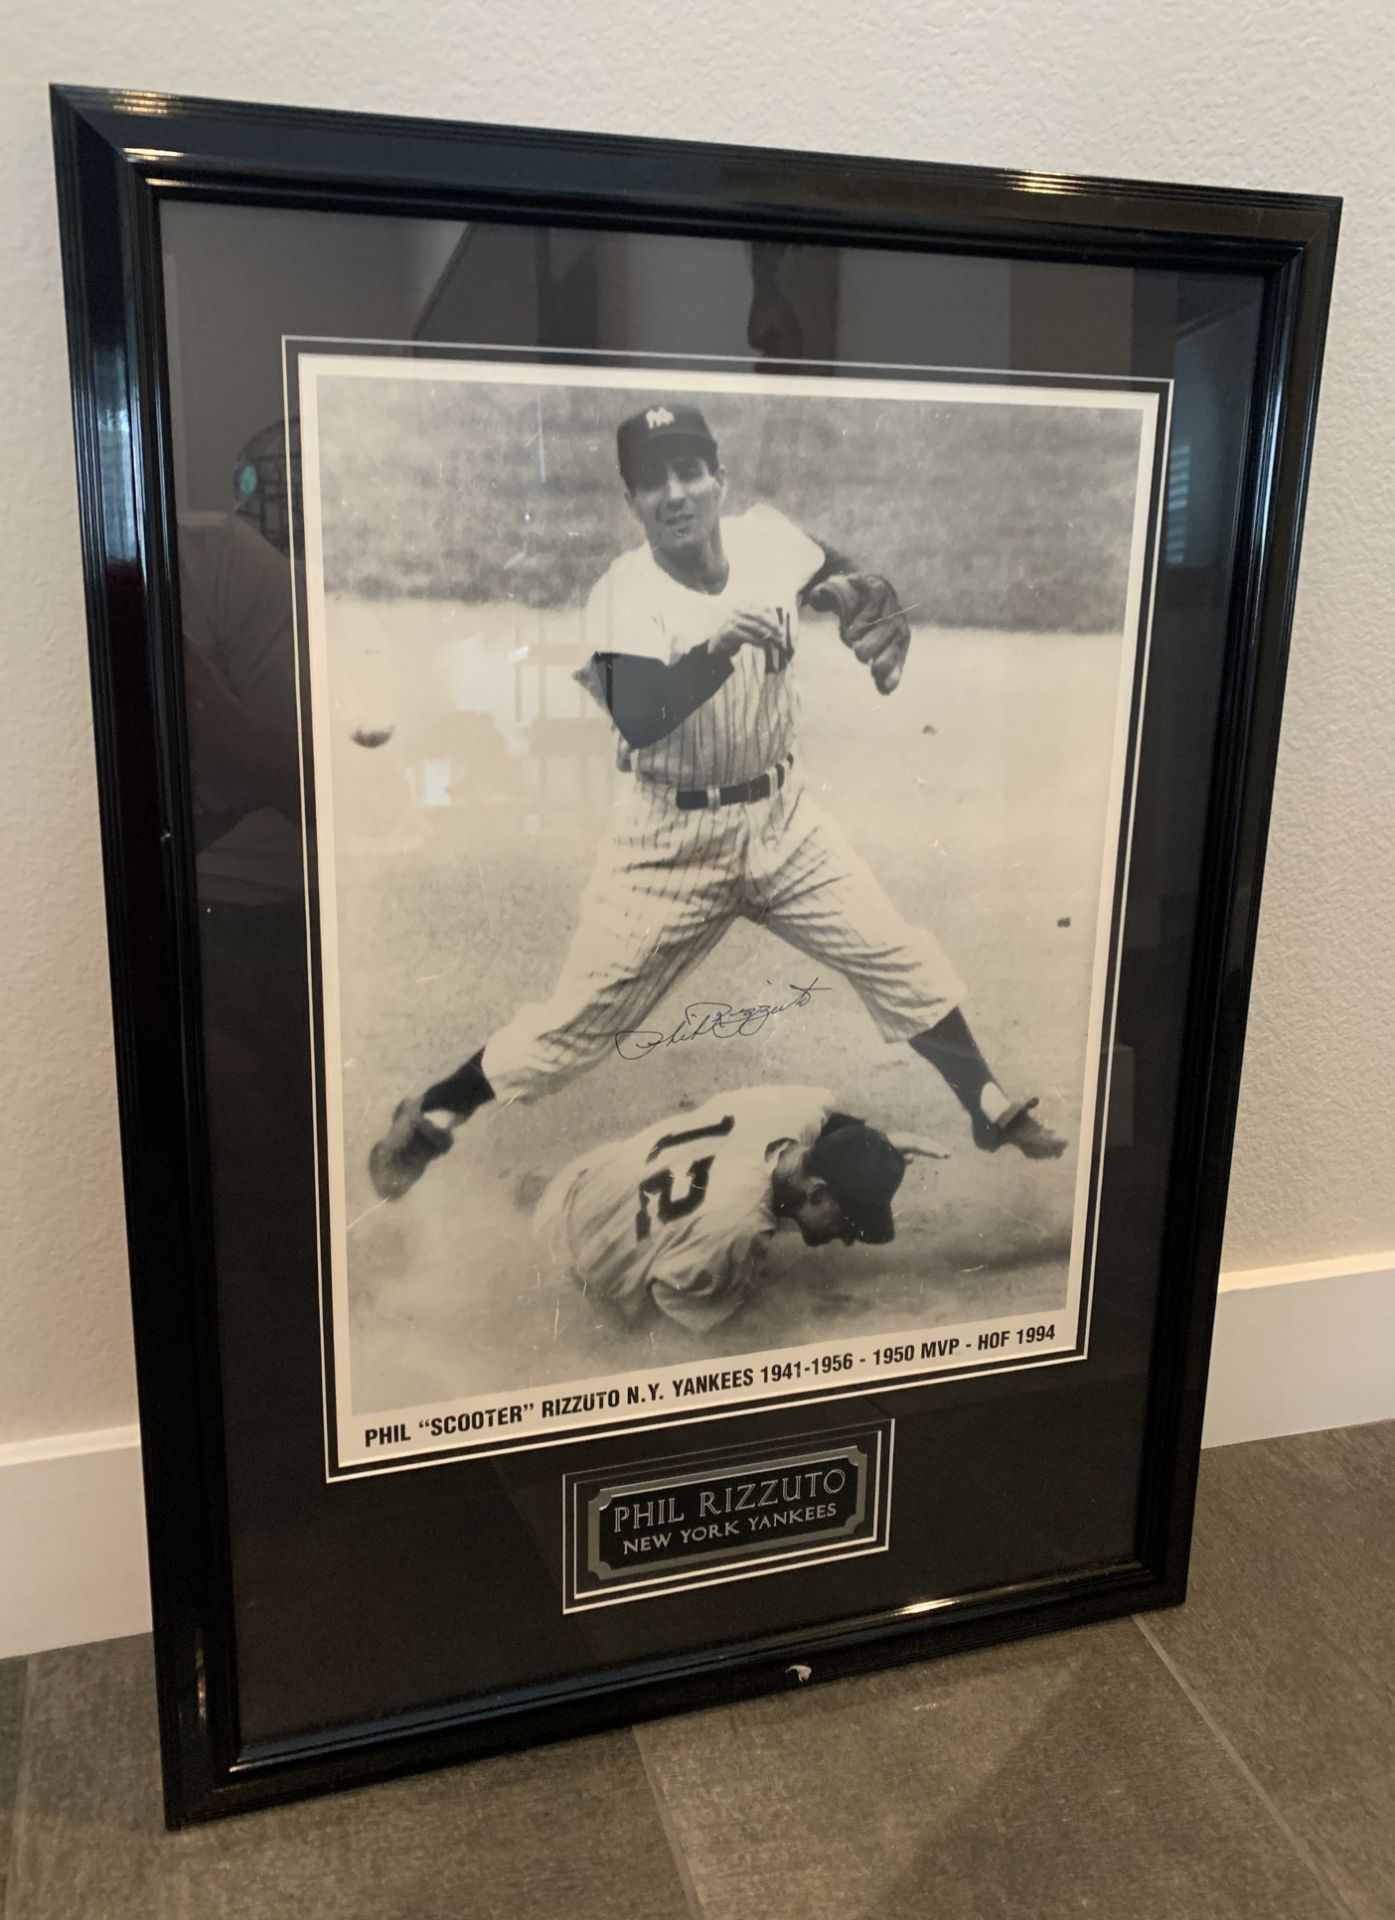 PHIL RIZUTTO NEW YORK YANKEES AUTOGRAPHED FRAMED PHOTO 30X22" - Image 5 of 5